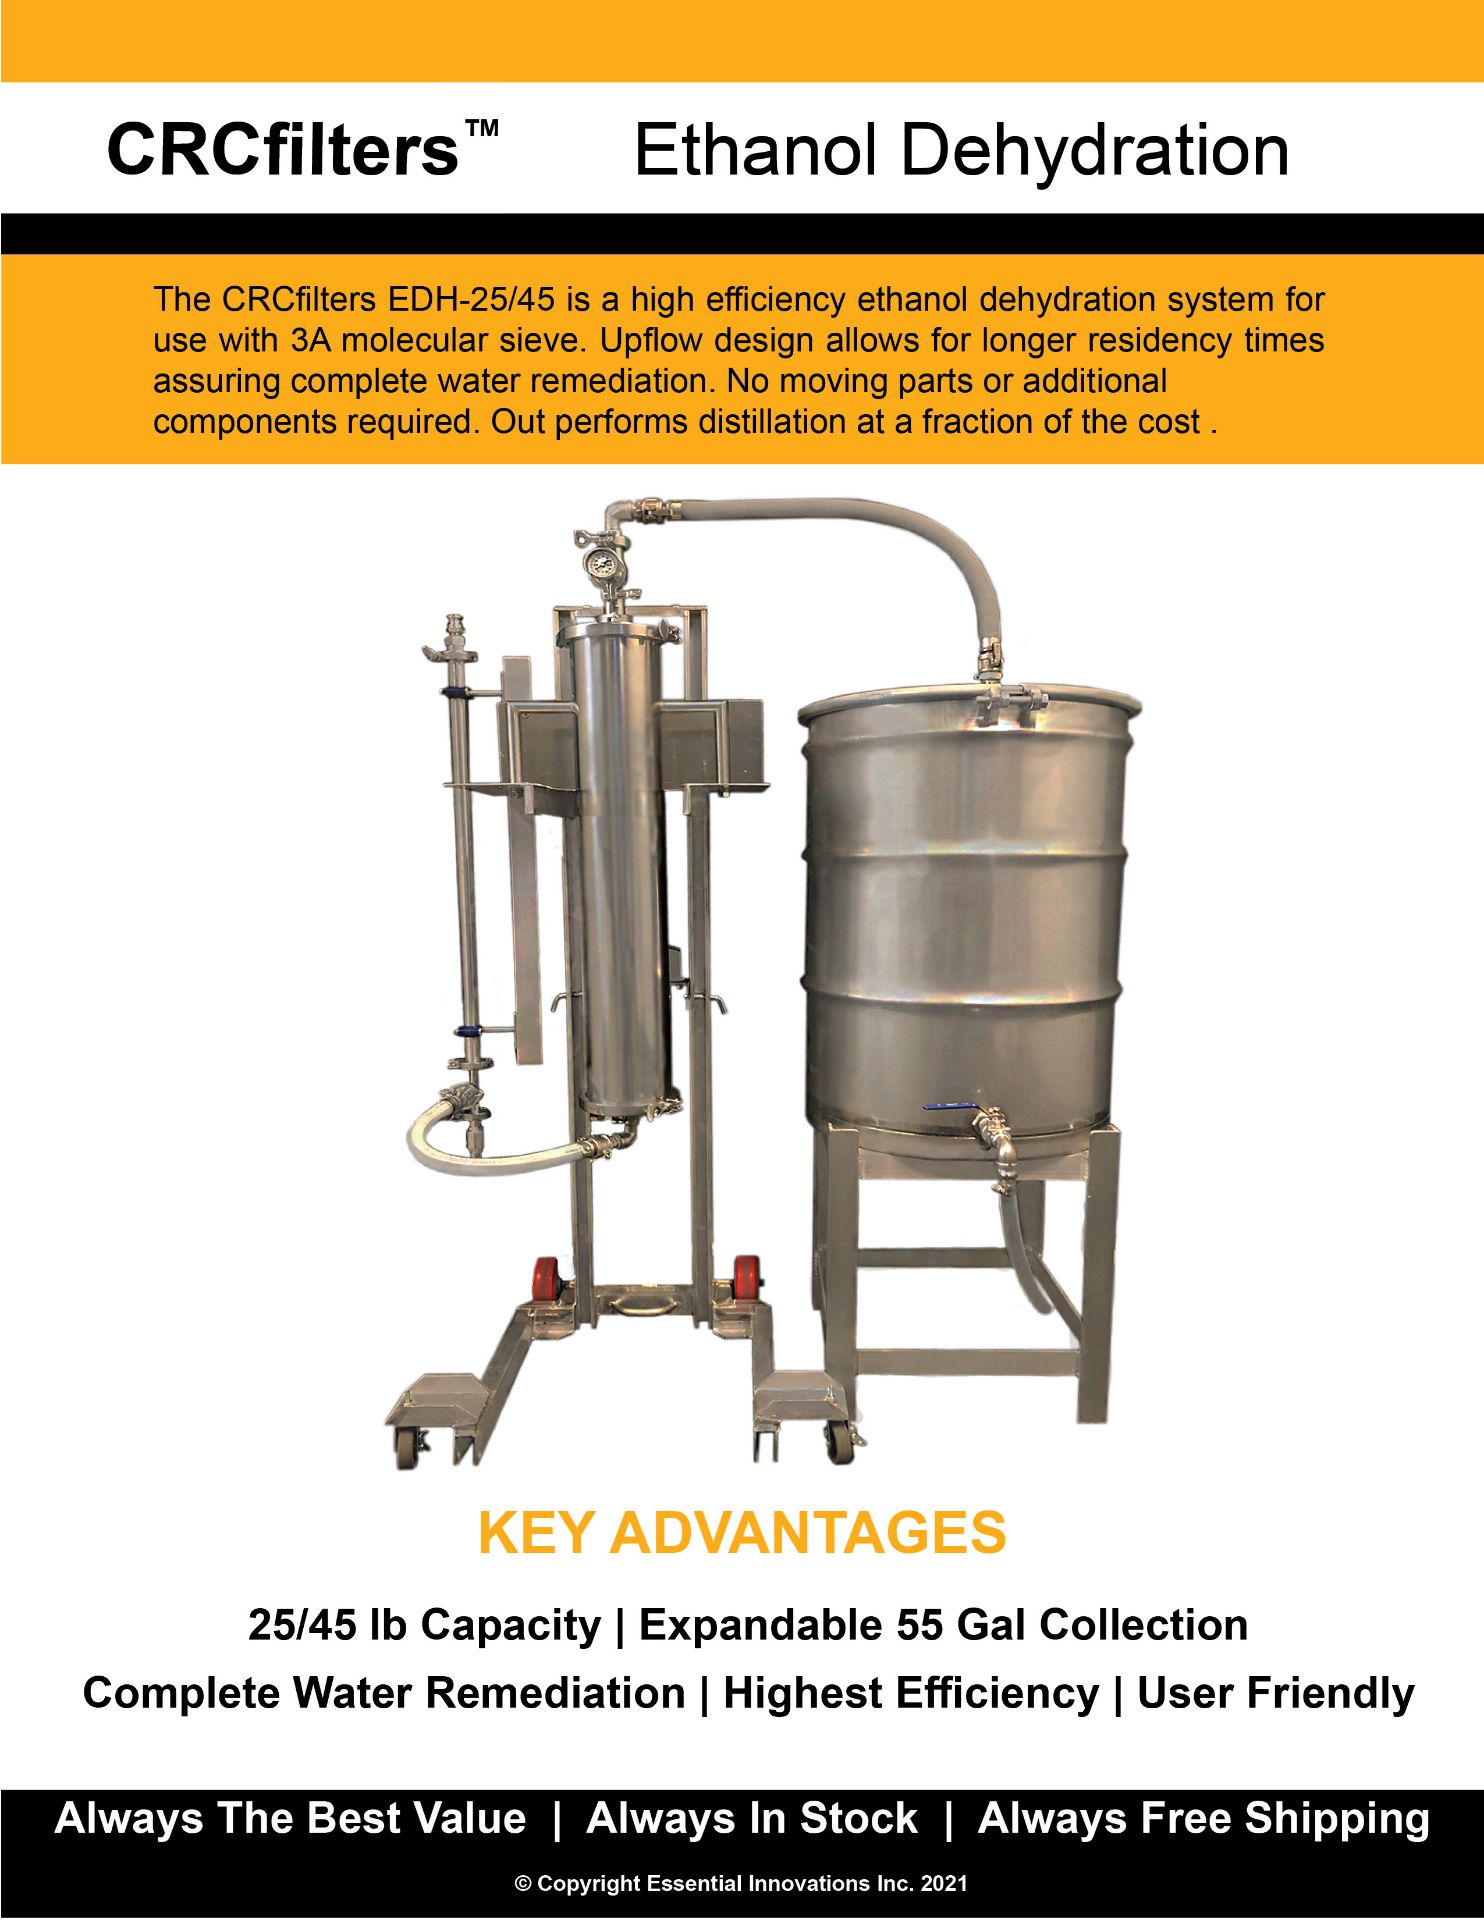 Used/Refurbished-CRCfilters Ethanol Dehydration System EDH-25. 25lb capacity 55 gal collection drum. - Image 5 of 6